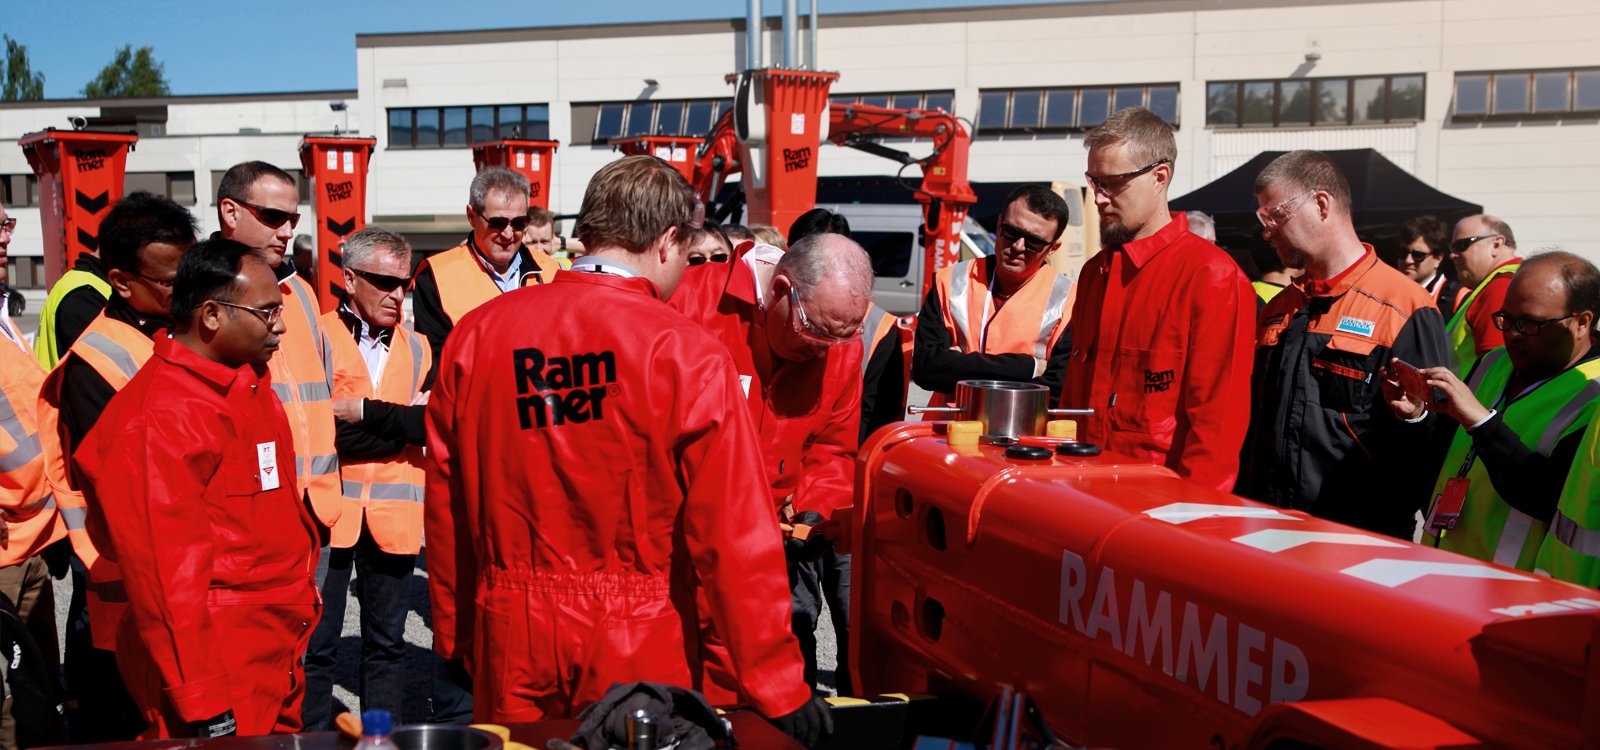 <p>Celebrating 40 years of the Rammer.</p>
